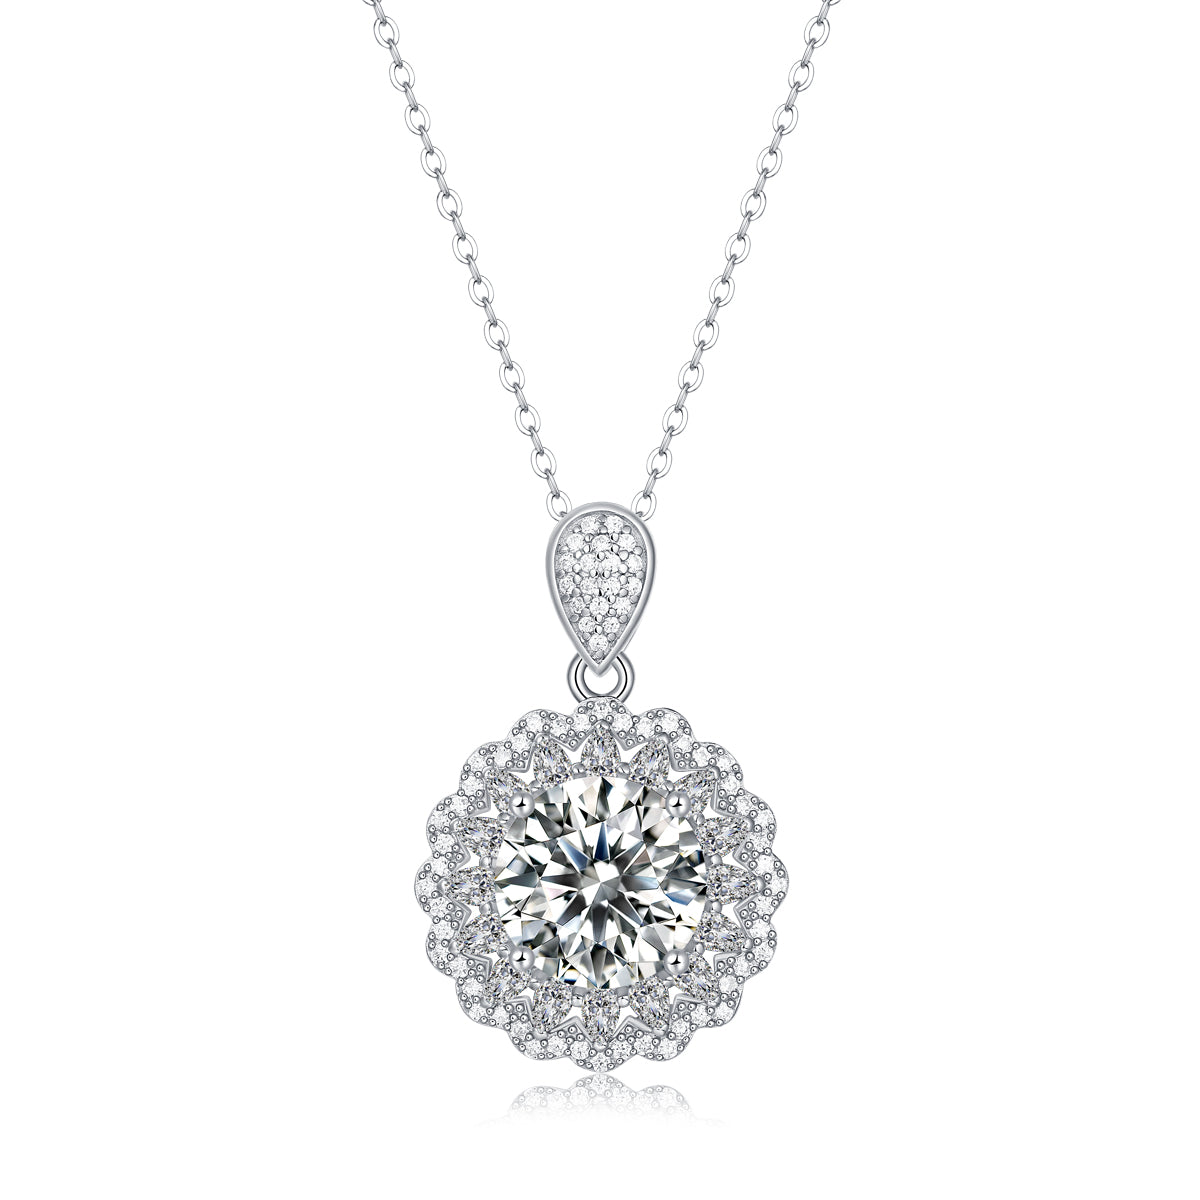 Adjustable Moissanite Floating life like a dream Necklaces P11515-11.0